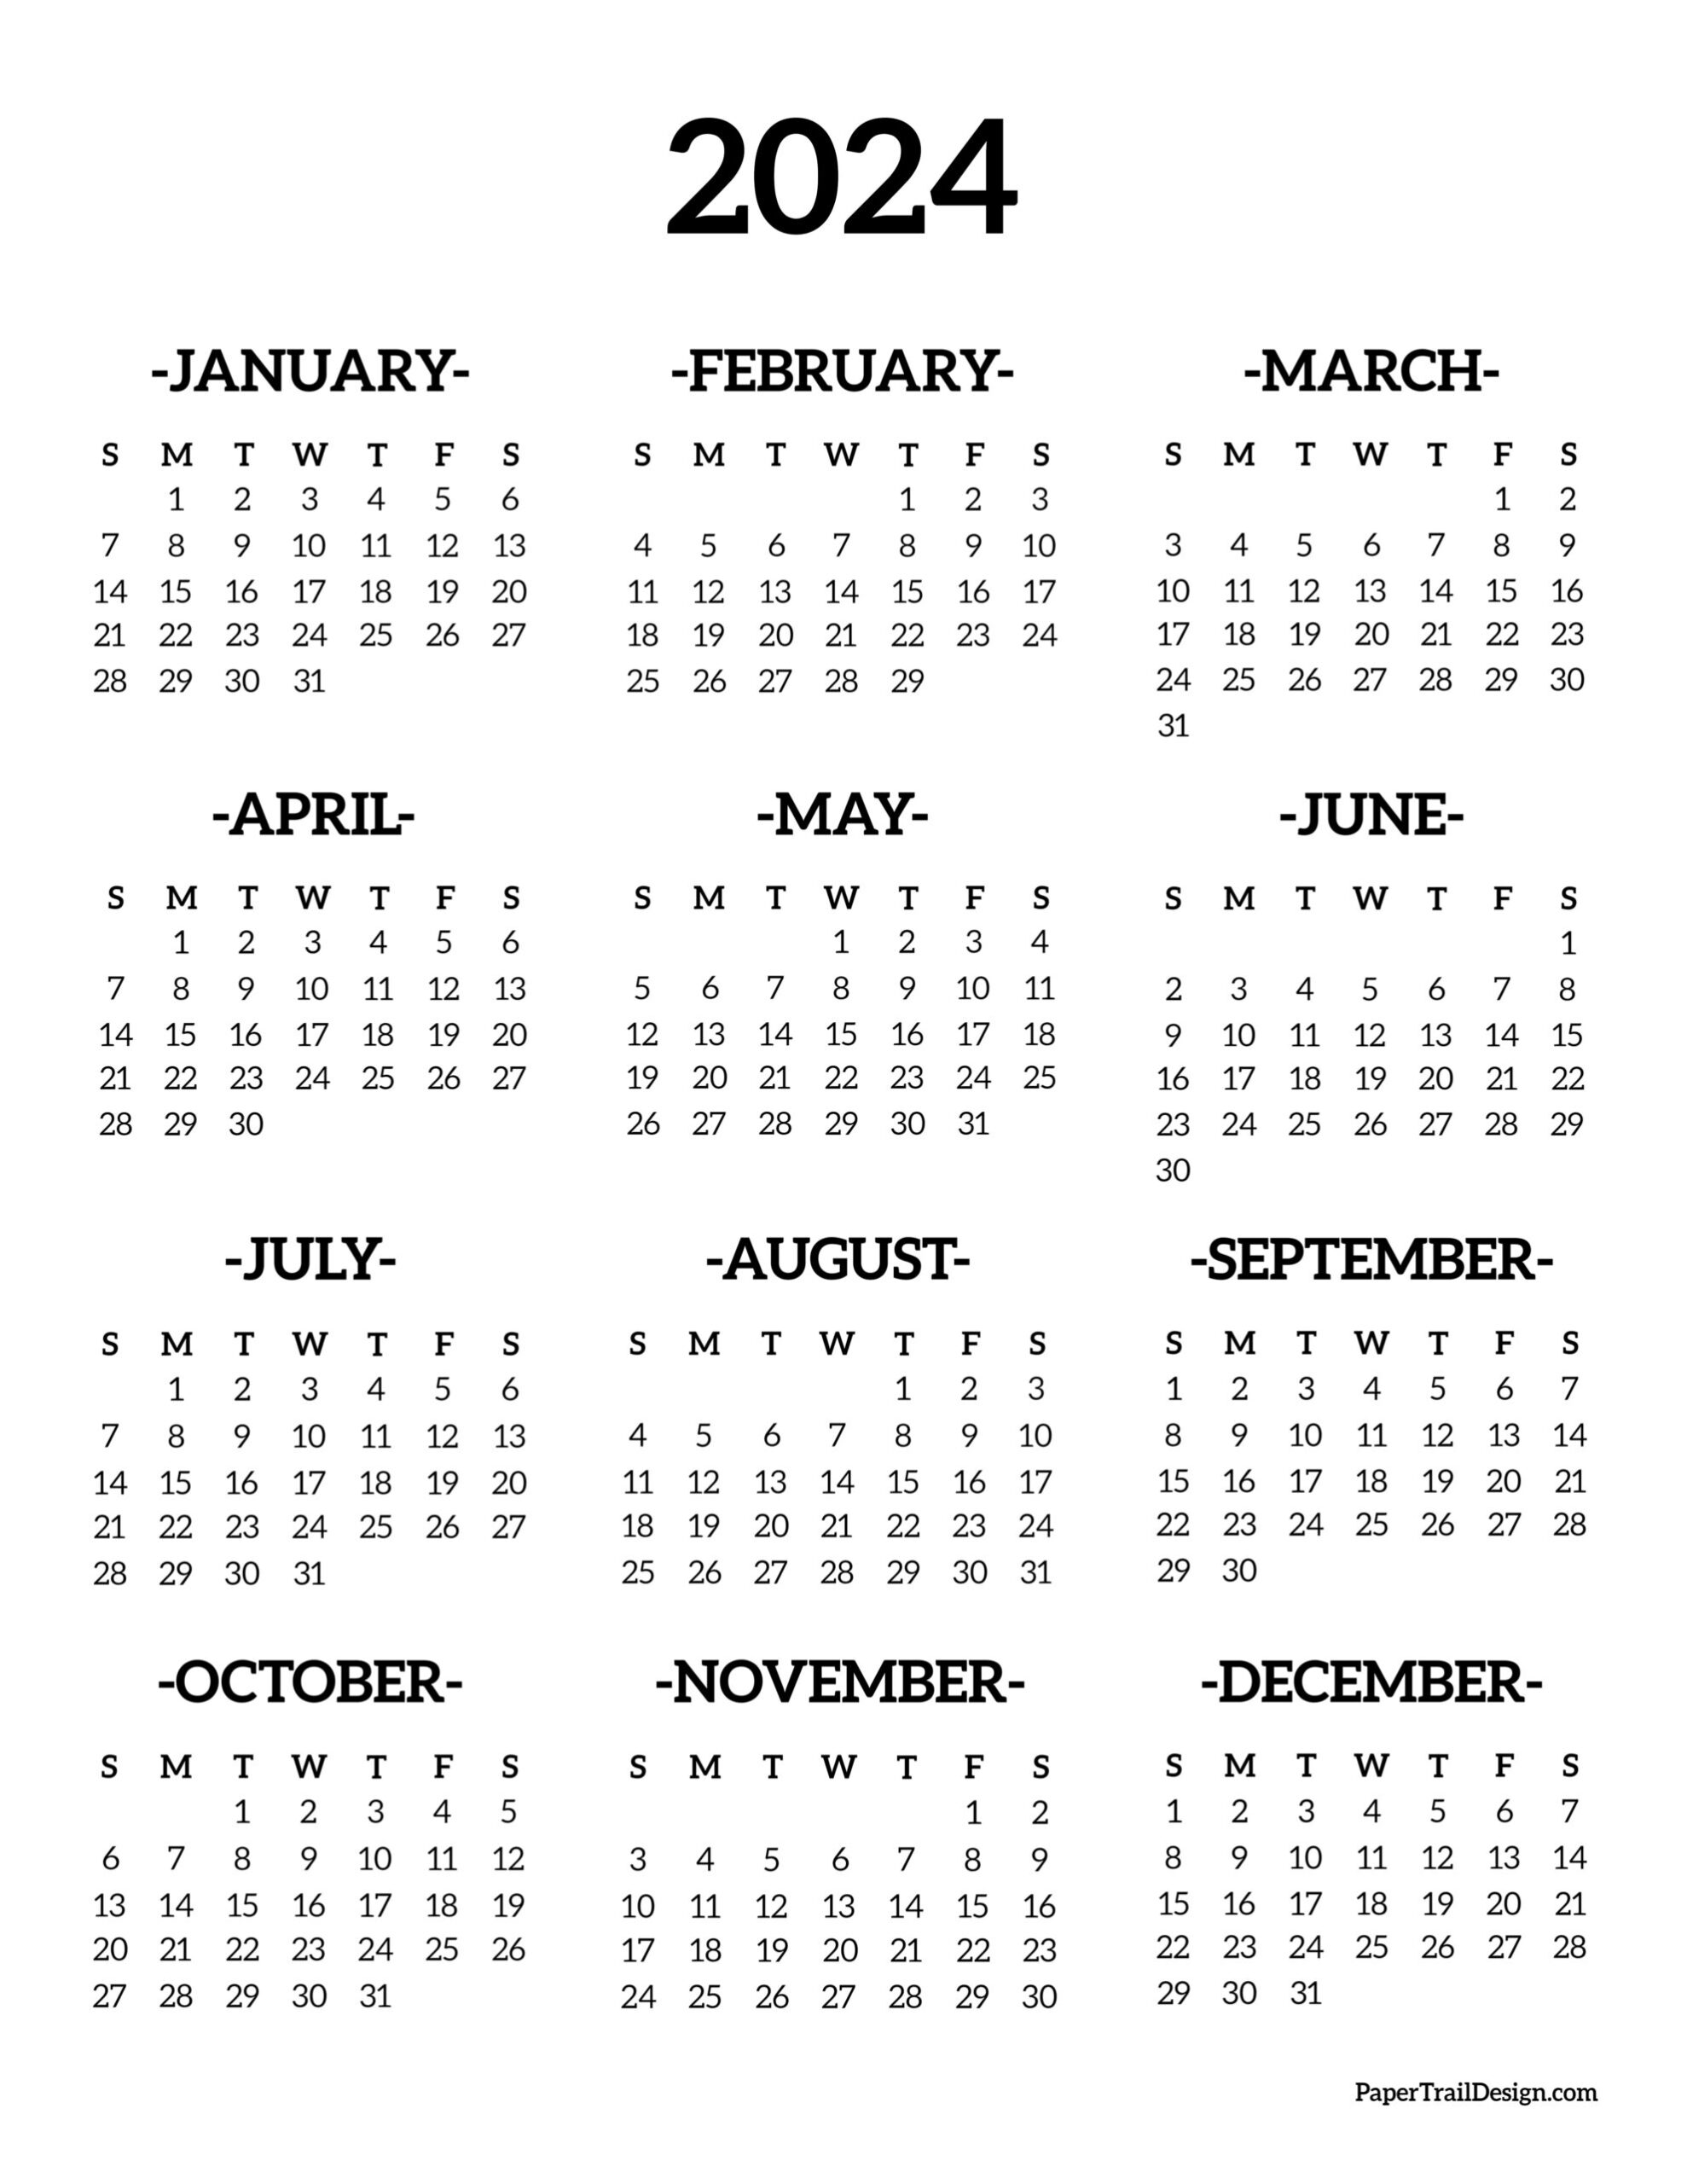 Calendar 2024 Printable One Page - Paper Trail Design for Printable 2024 Calendar One Page Free